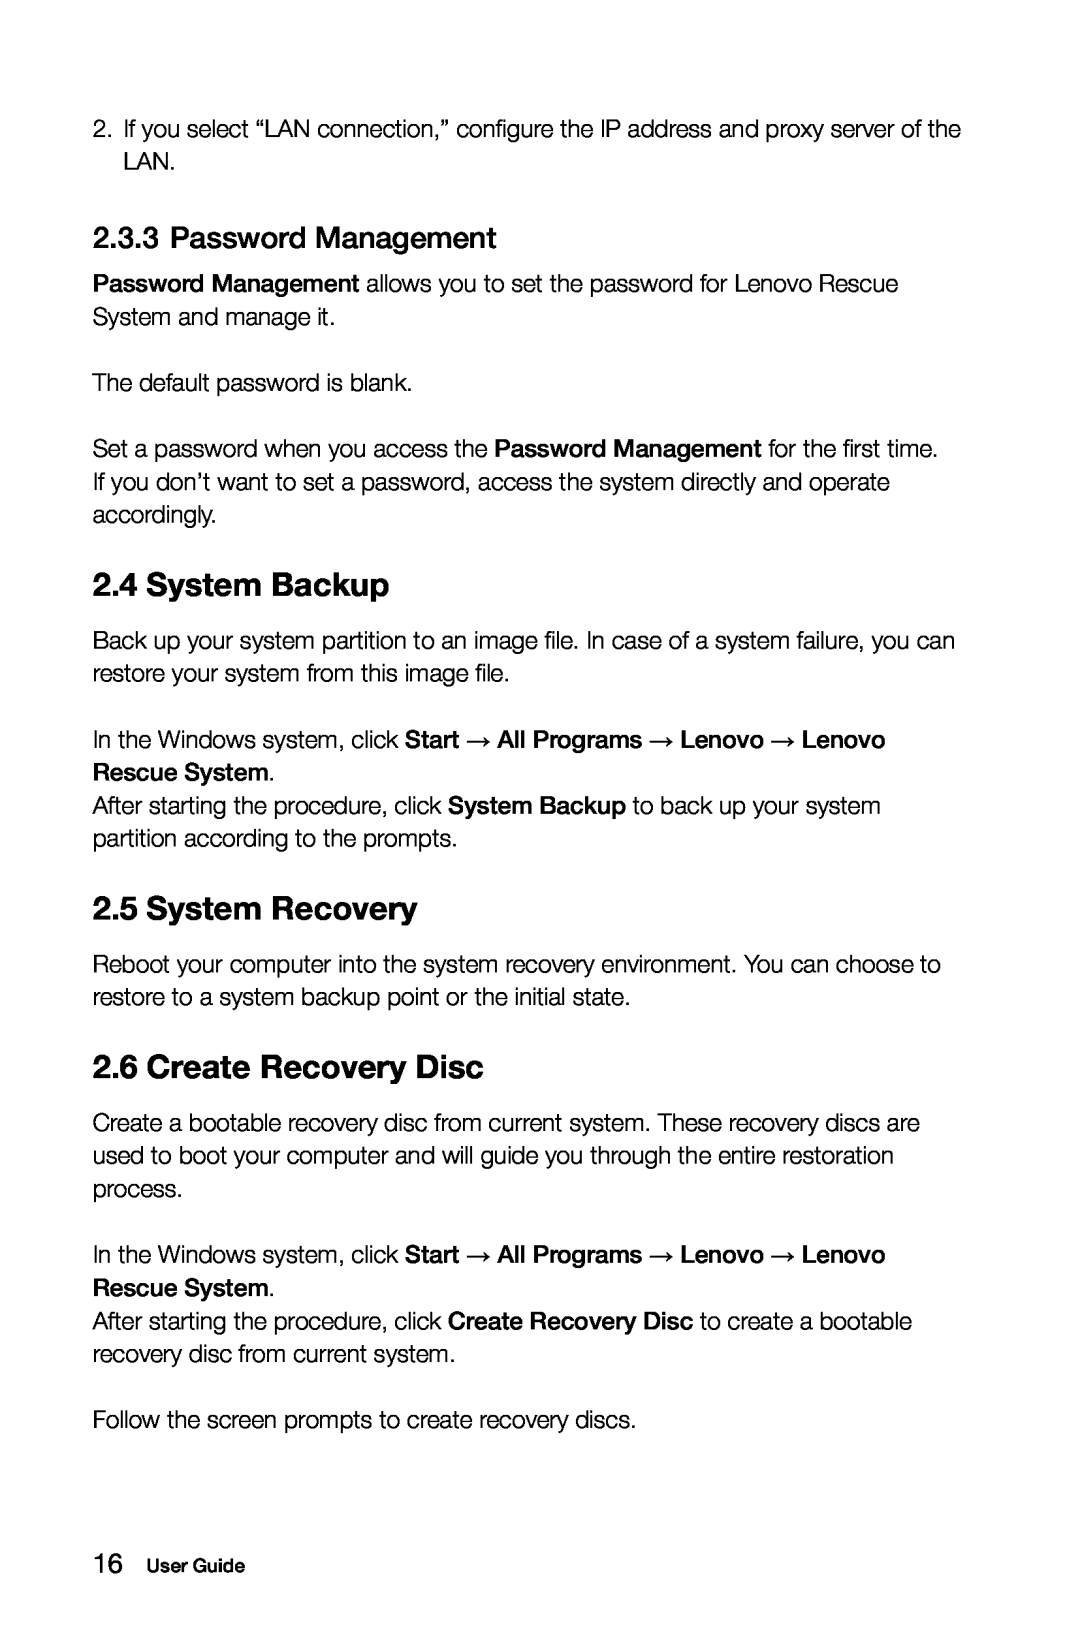 Lenovo 10041-10049 manual System Backup, System Recovery, Create Recovery Disc, Password Management 